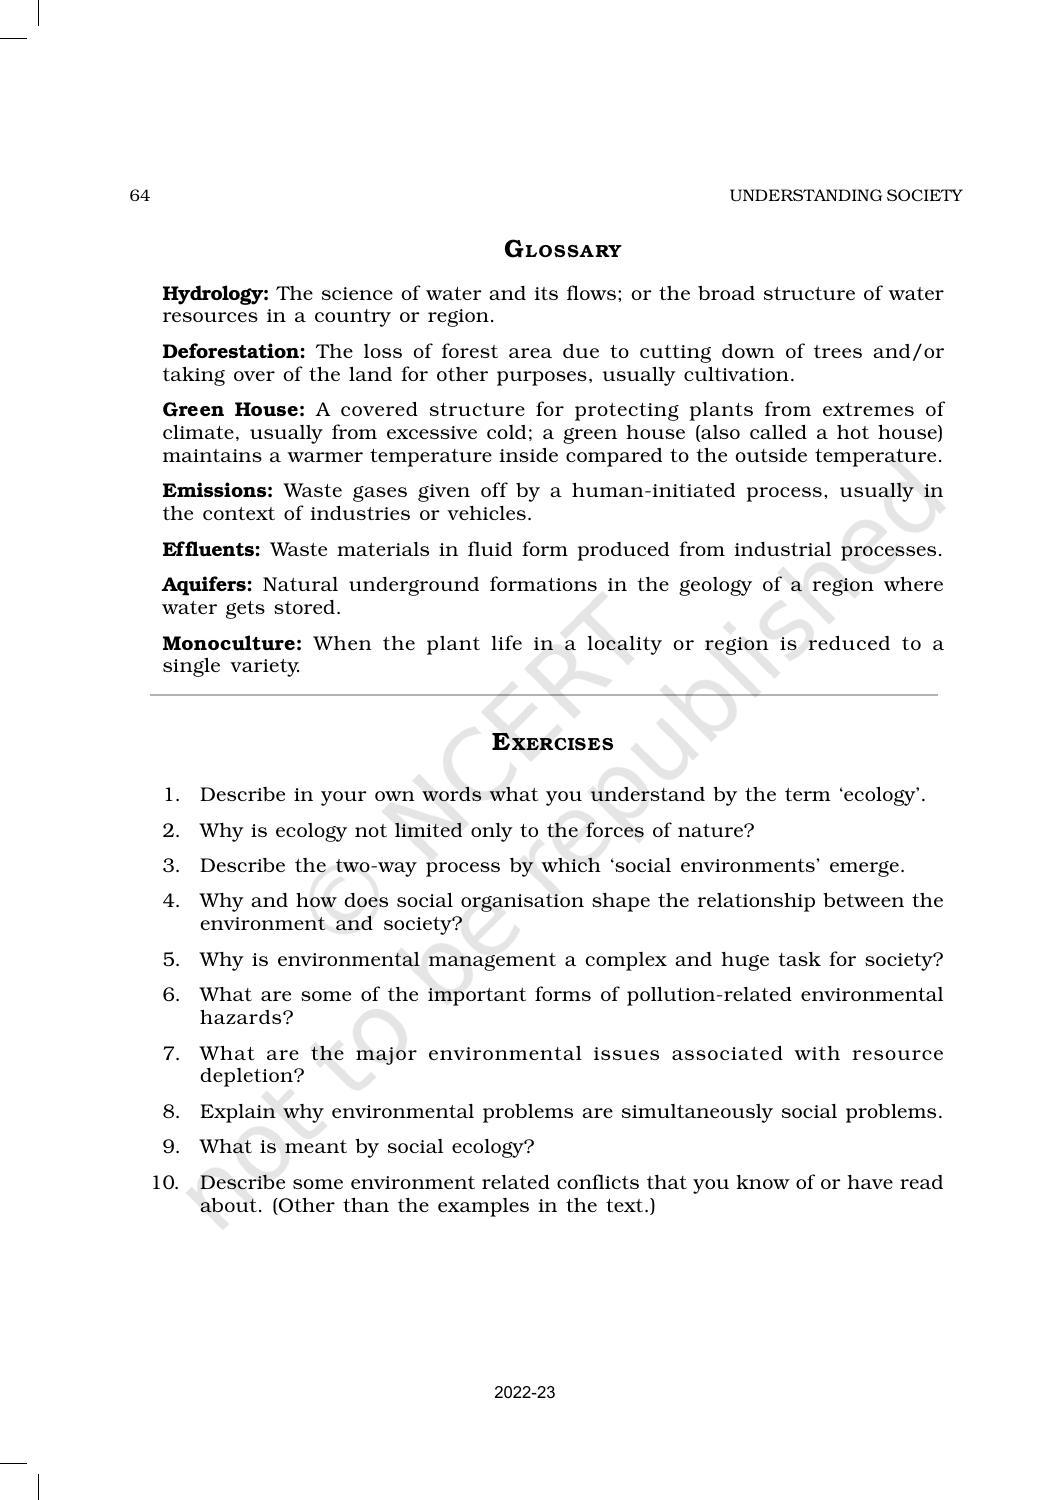 NCERT Book for Class 11 Sociology (Part-II) Chapter 3 Environment and Society - Page 15